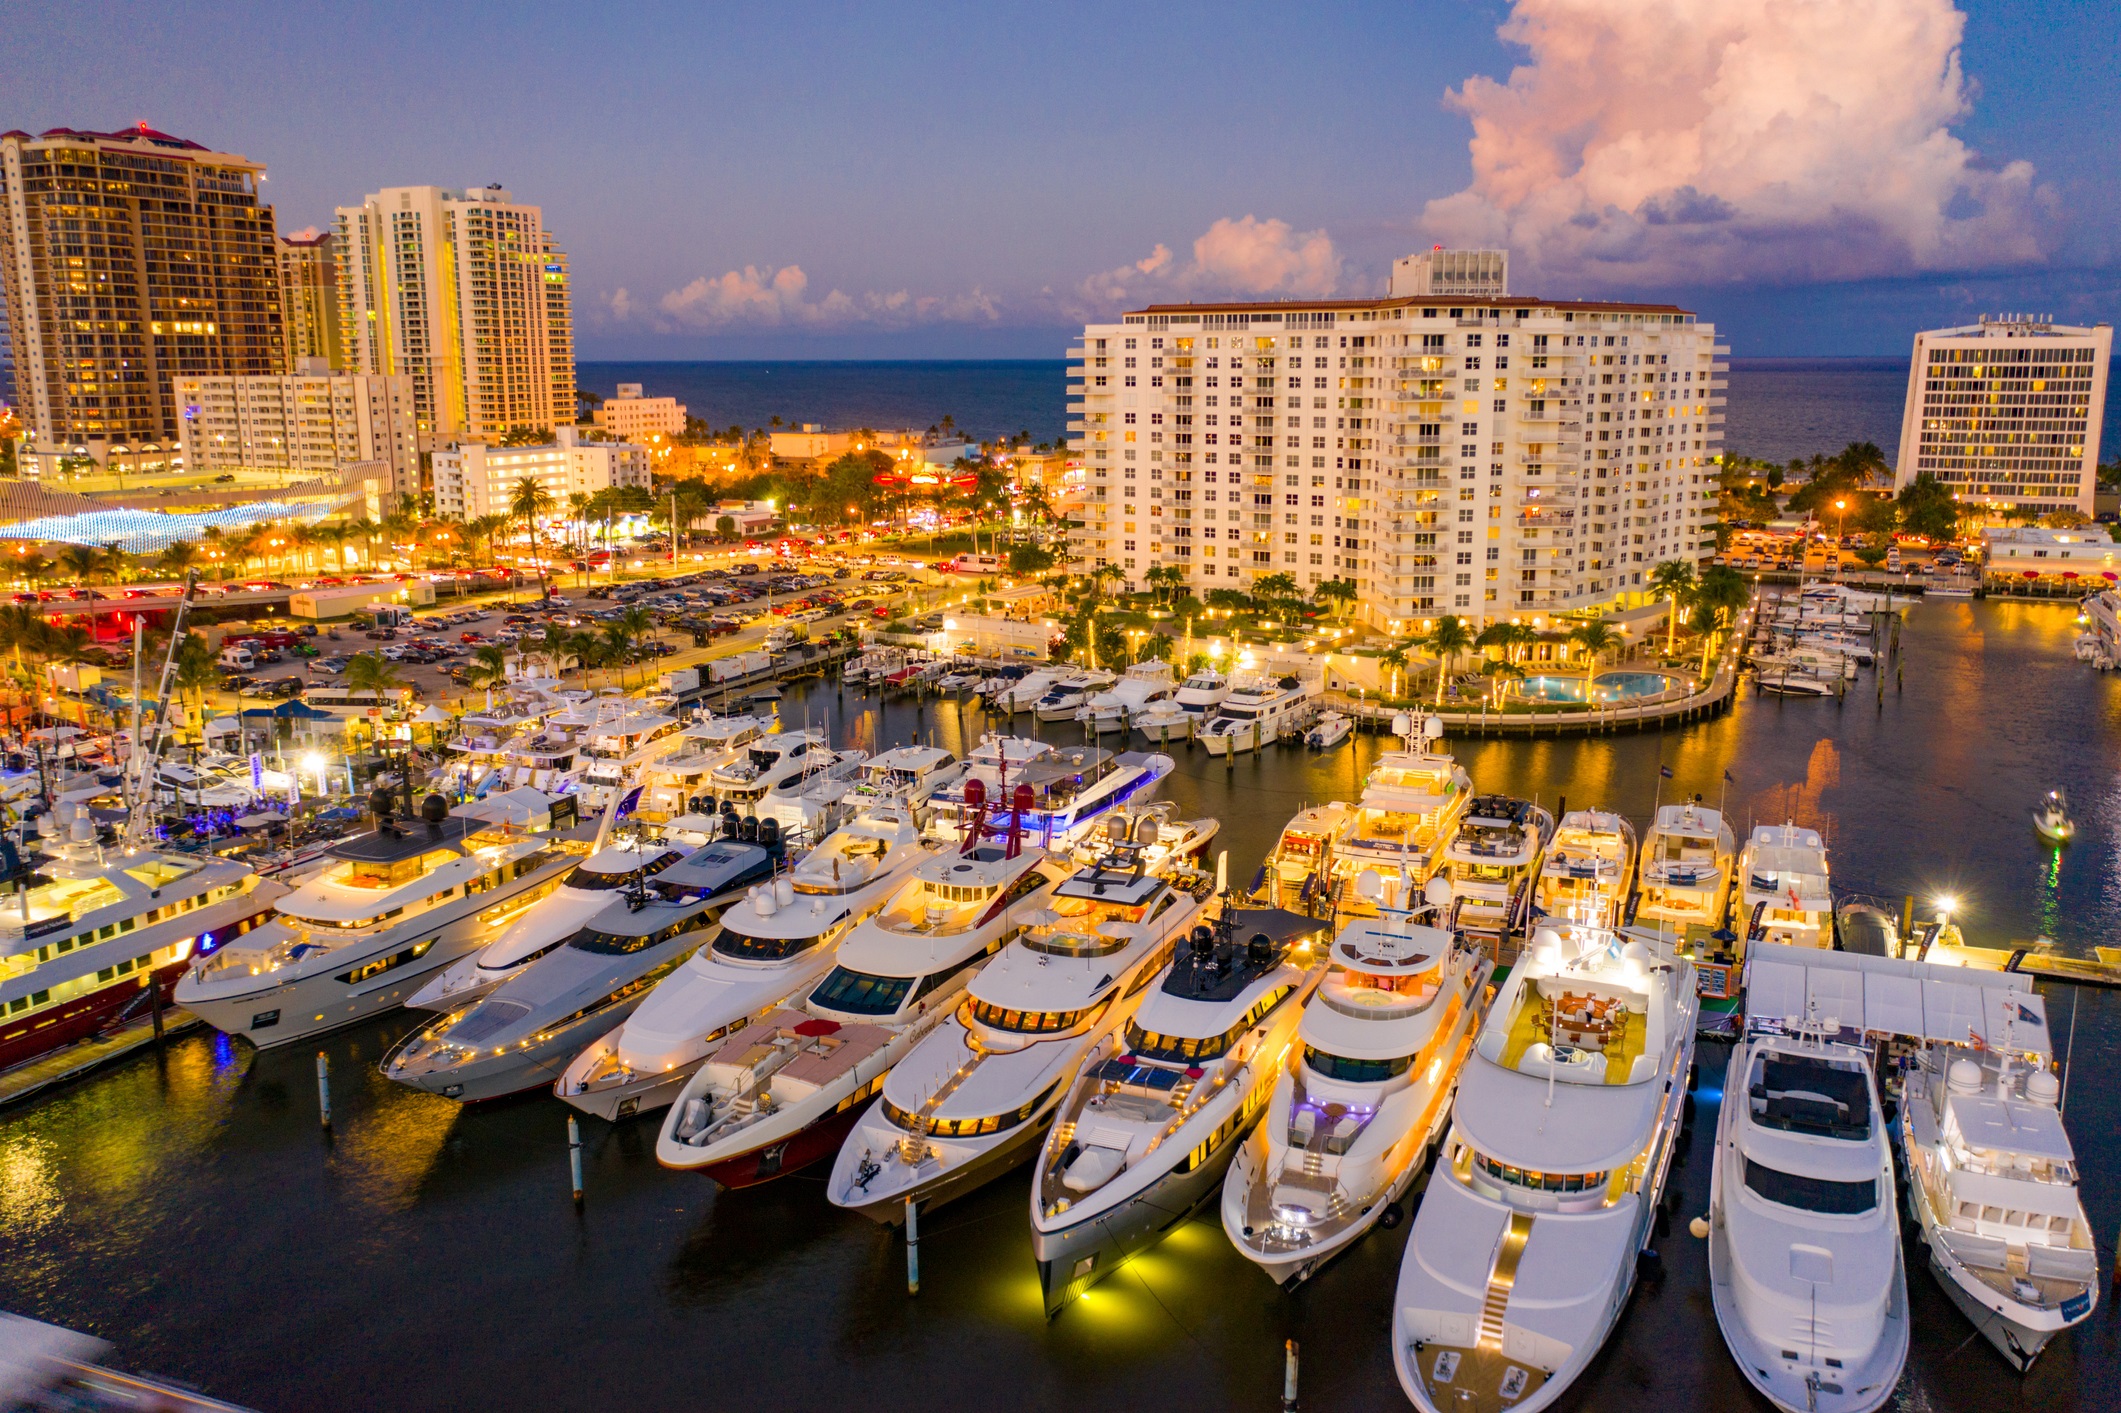 The Daytona Boat Show is coming to town! - Enclave at 3230